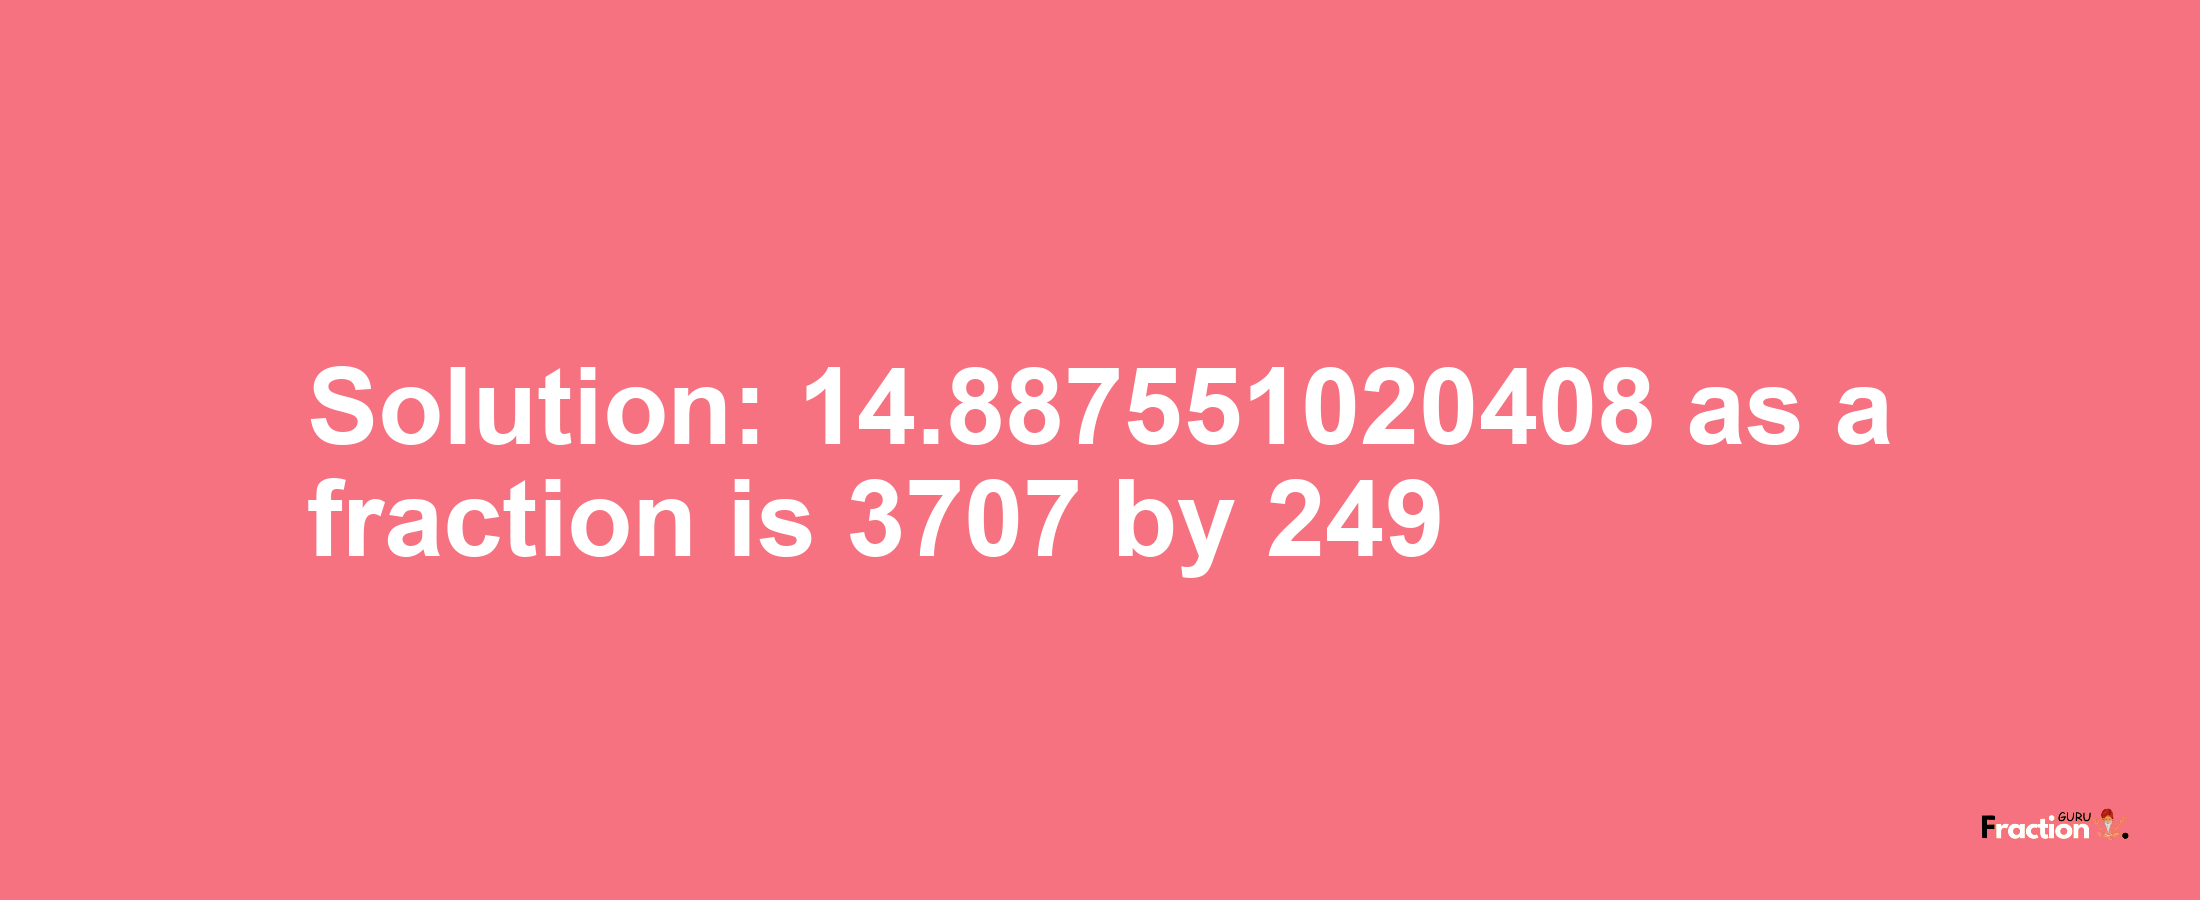 Solution:14.887551020408 as a fraction is 3707/249